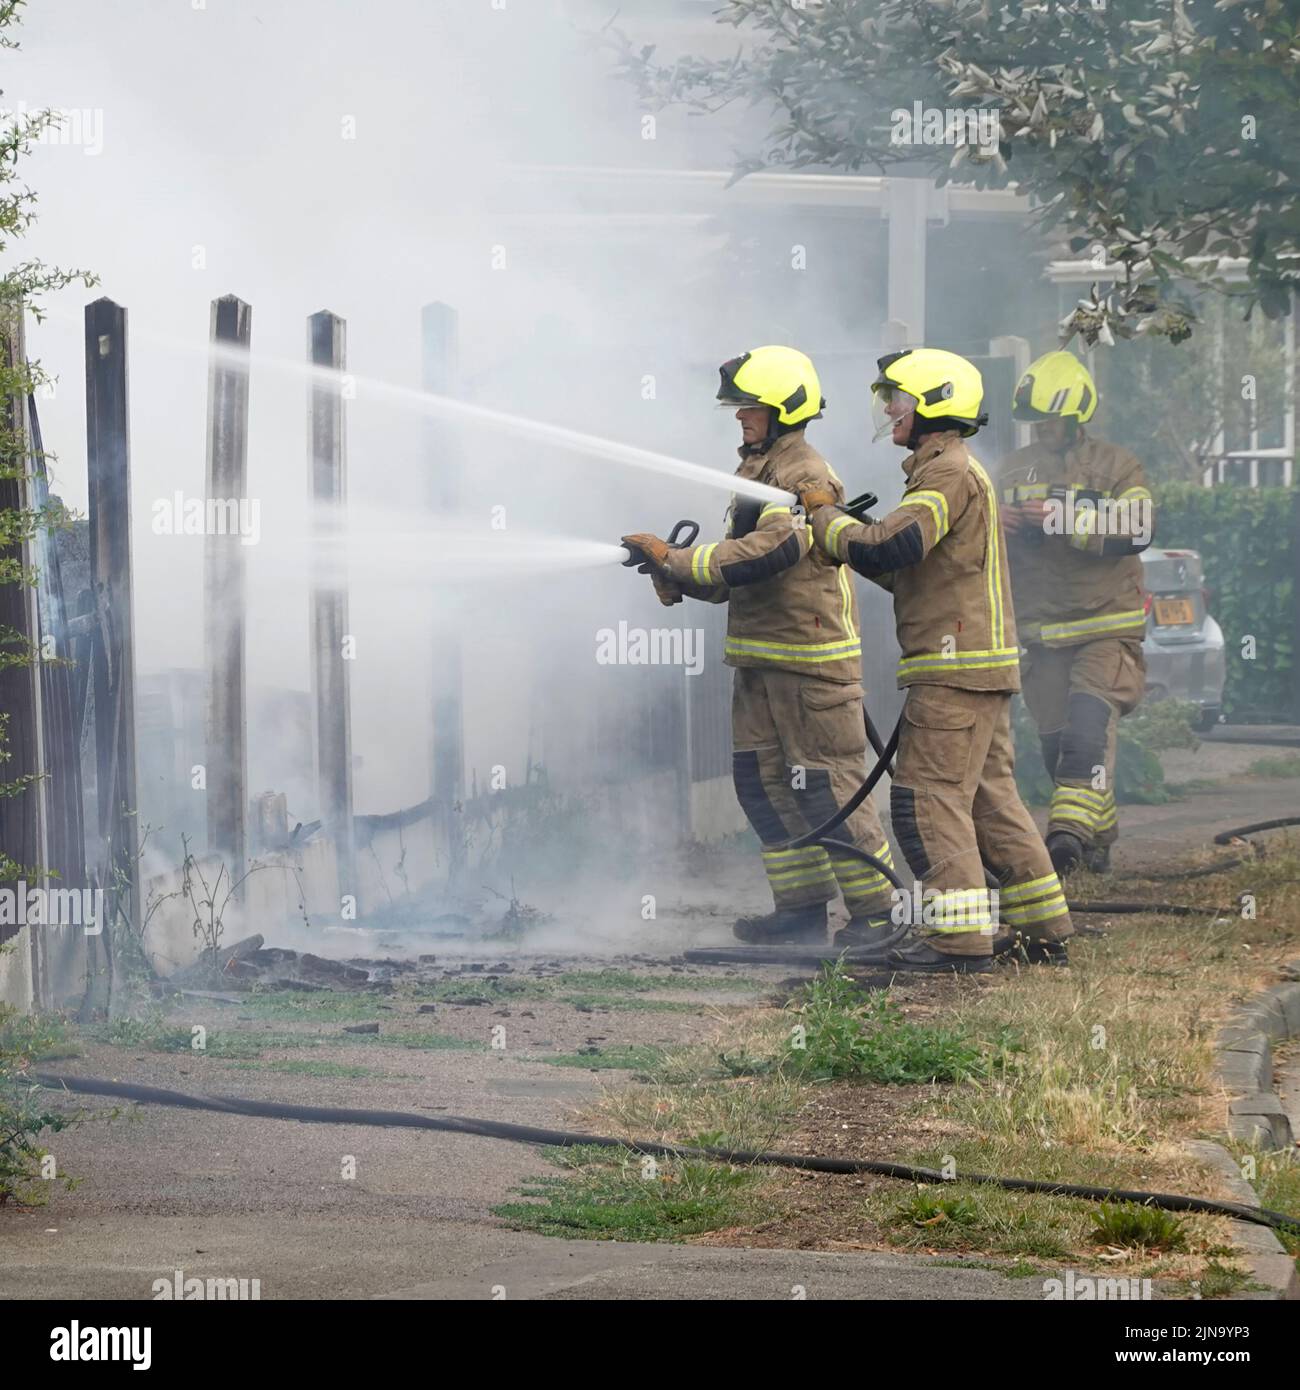 Essex Fire and Rescue Service group of firefighters in protective clothing dangerous & hazardous work house fire working with water hoses England UK Stock Photo